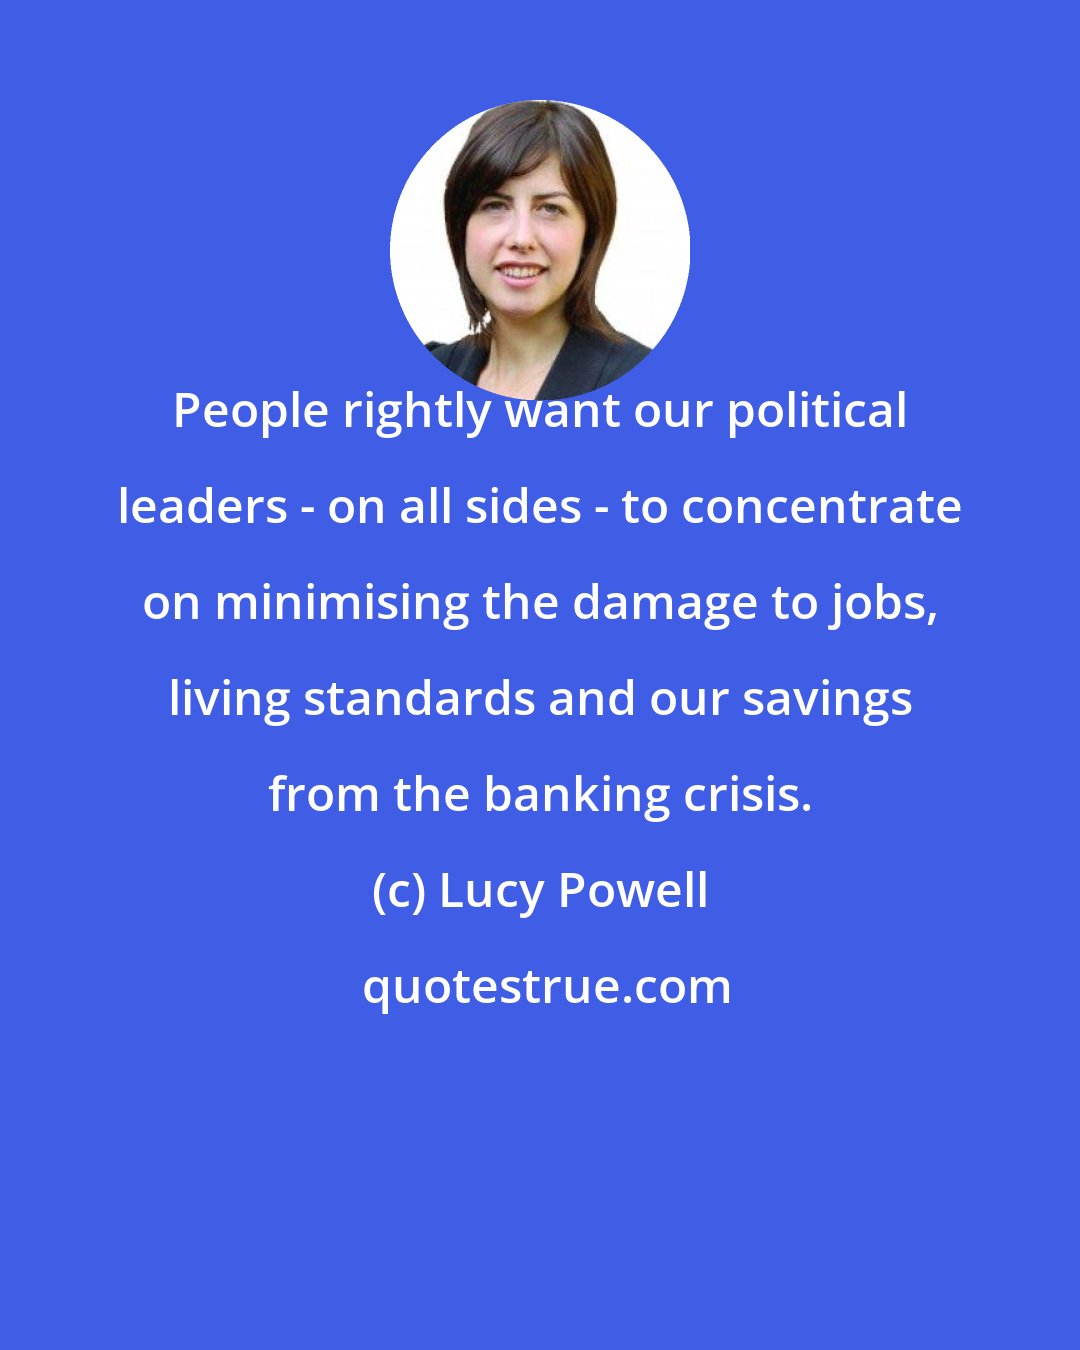 Lucy Powell: People rightly want our political leaders - on all sides - to concentrate on minimising the damage to jobs, living standards and our savings from the banking crisis.